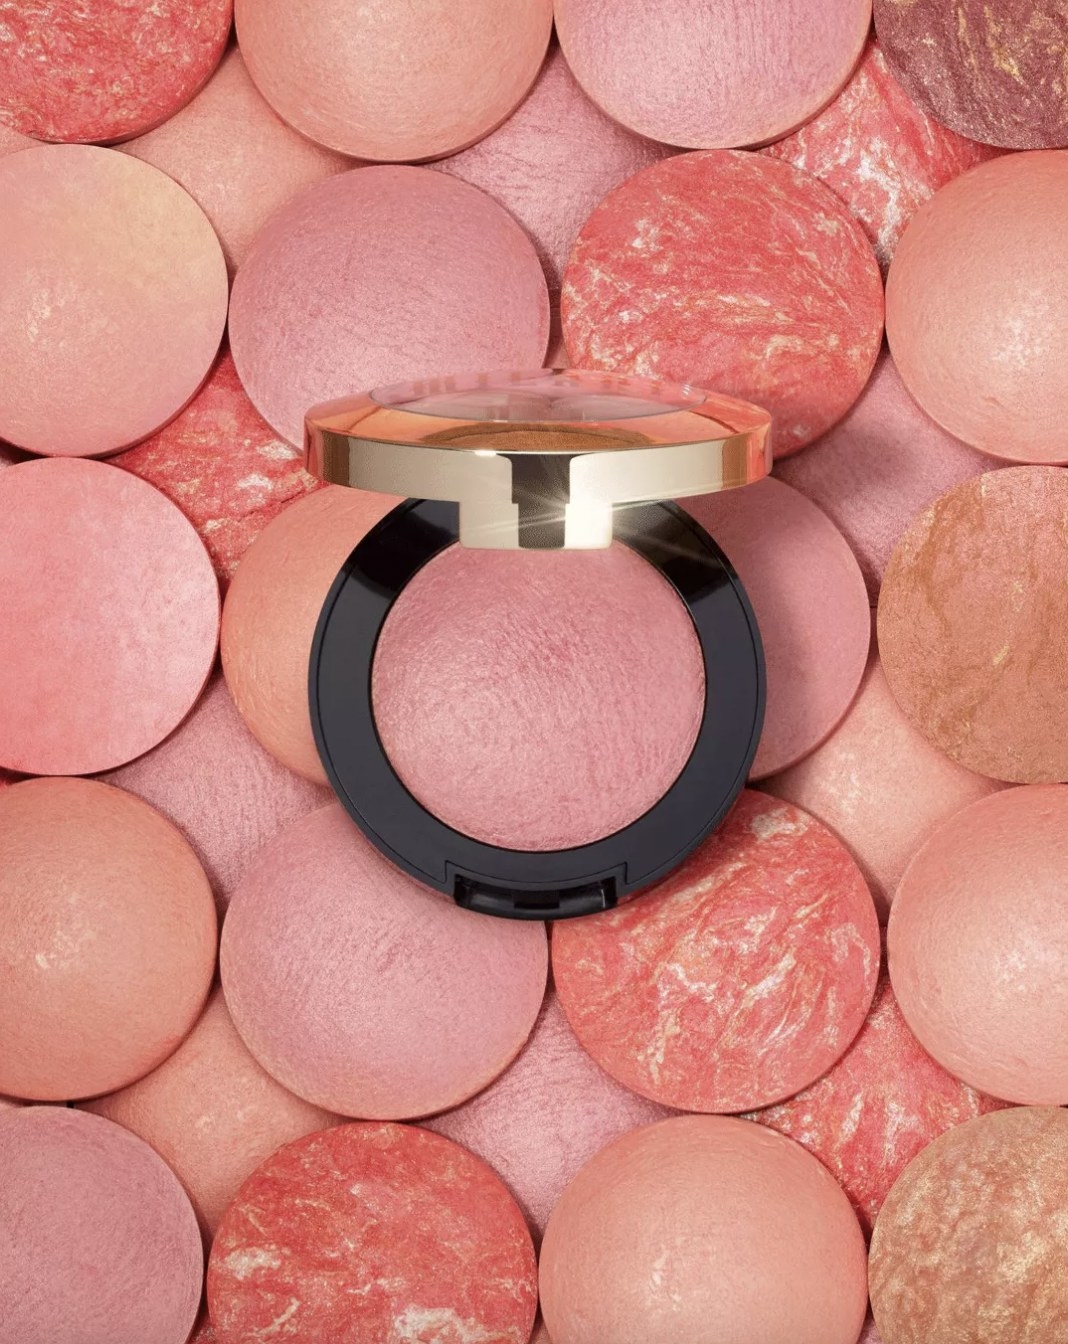 A blush compact placed on a various blush colors